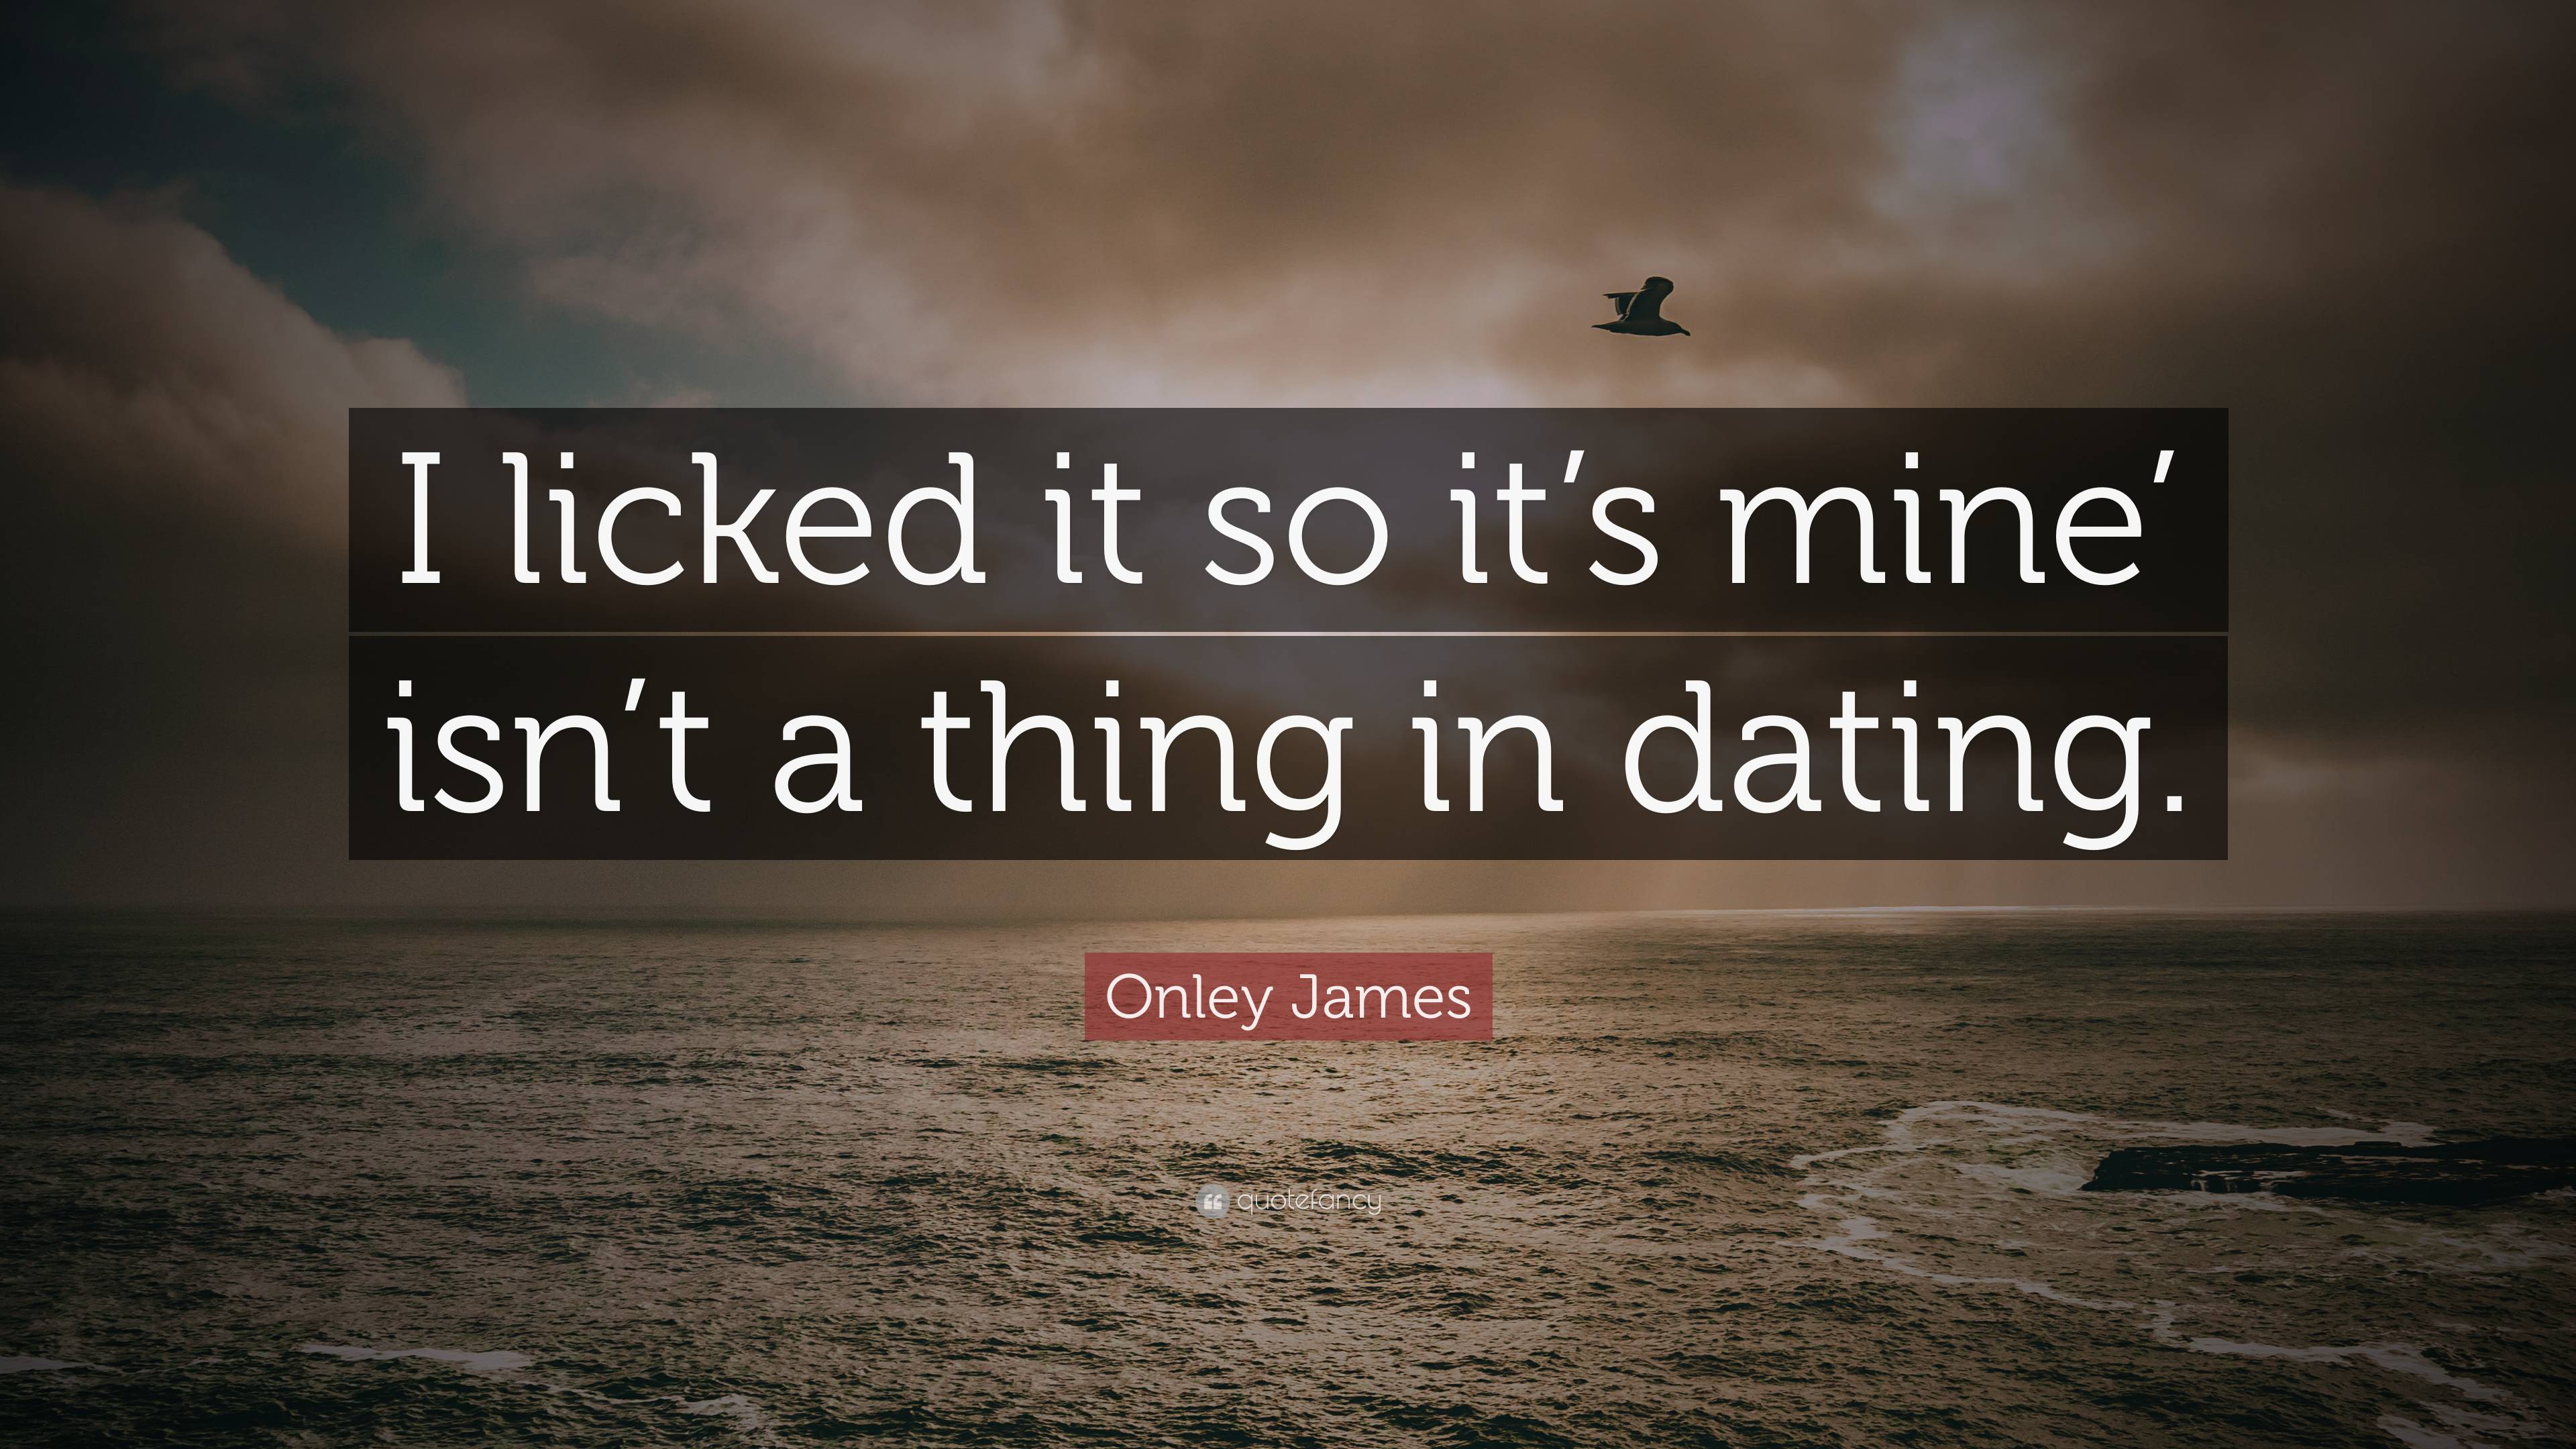 Onley James Quote: “I licked it so it's mine' isn't a thing in dating.”